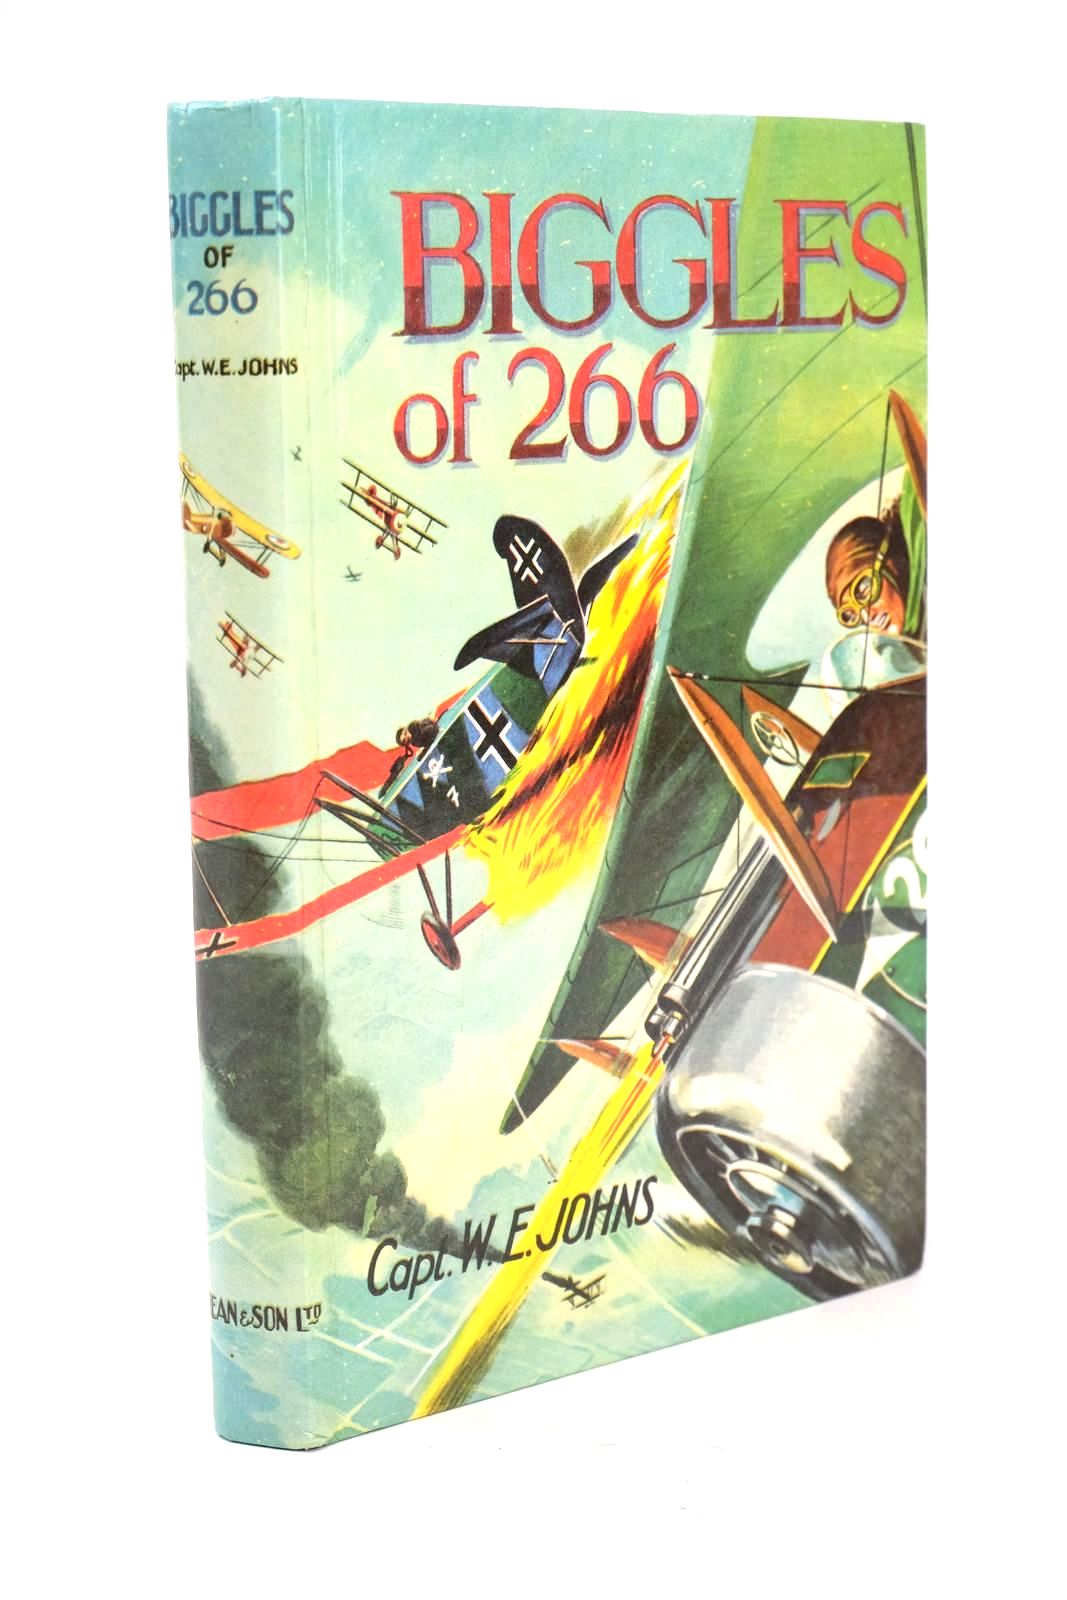 Photo of BIGGLES OF 266 written by Johns, W.E. published by Dean &amp; Son Ltd. (STOCK CODE: 1326230)  for sale by Stella & Rose's Books